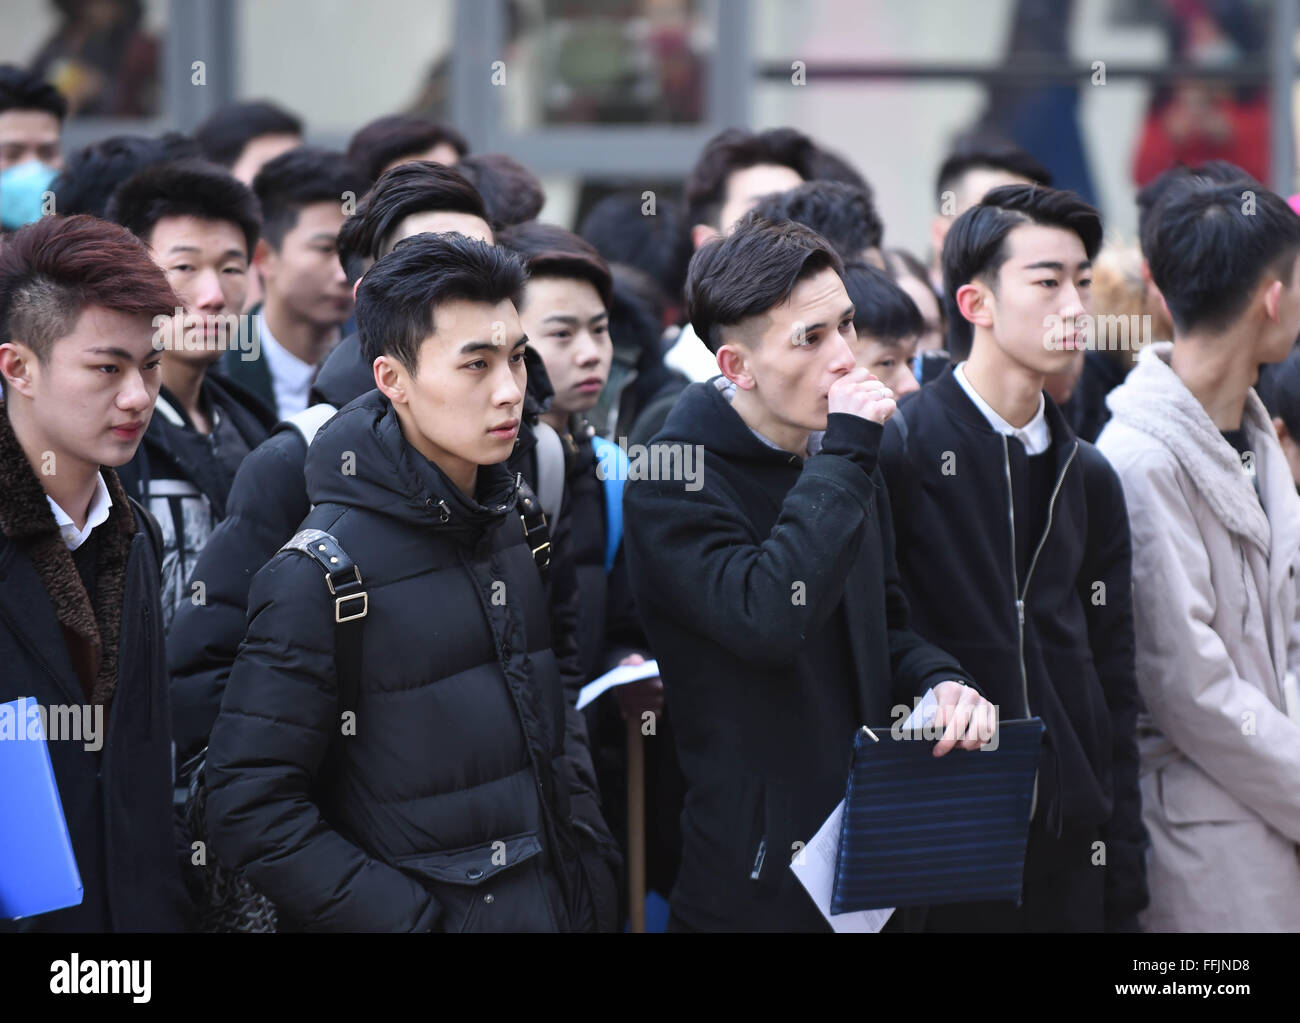 Beijing, China. 15th Feb, 2016. Candidates wait outside the examination hall at Beijing Film Academy (BFA) in Beijing, capital of China, Feb. 15, 2016. The annual entrance exam of China's art colleges including BFA, the Central Academy of Drama and the Communication University of China started simultaneously on Monday. Over 7,600 applicants for BFA's performance institute will take part in the exam to vie for 45 vacancies in the institute. Some Chinese young people regarded studying in an art college as a shortcut to become famous in recent years. © Li Wen/Xinhua/Alamy Live News Stock Photo